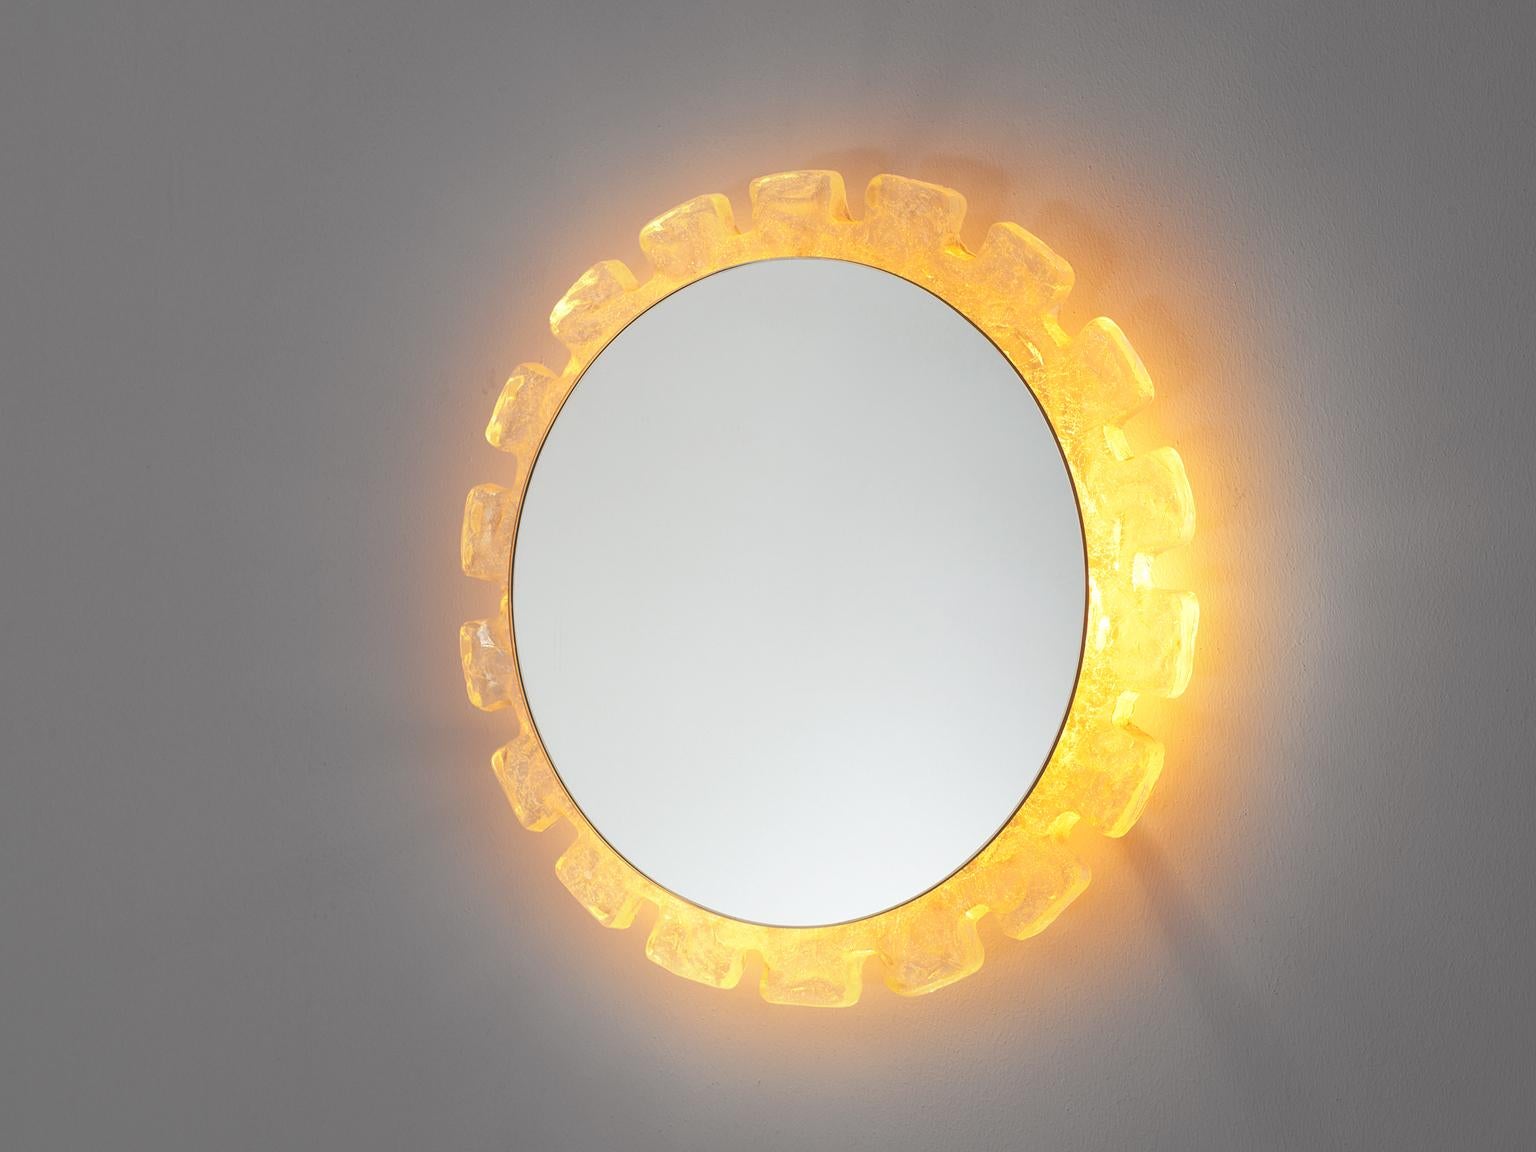 Hillebrand lighting, illuminated mirror with acrylic ice ring, Germany, 1960s.

Wall-mounted mirror with round geometric structure which circulates around it. Stylish round illuminated circular shape which gives a better visibility. The reflected